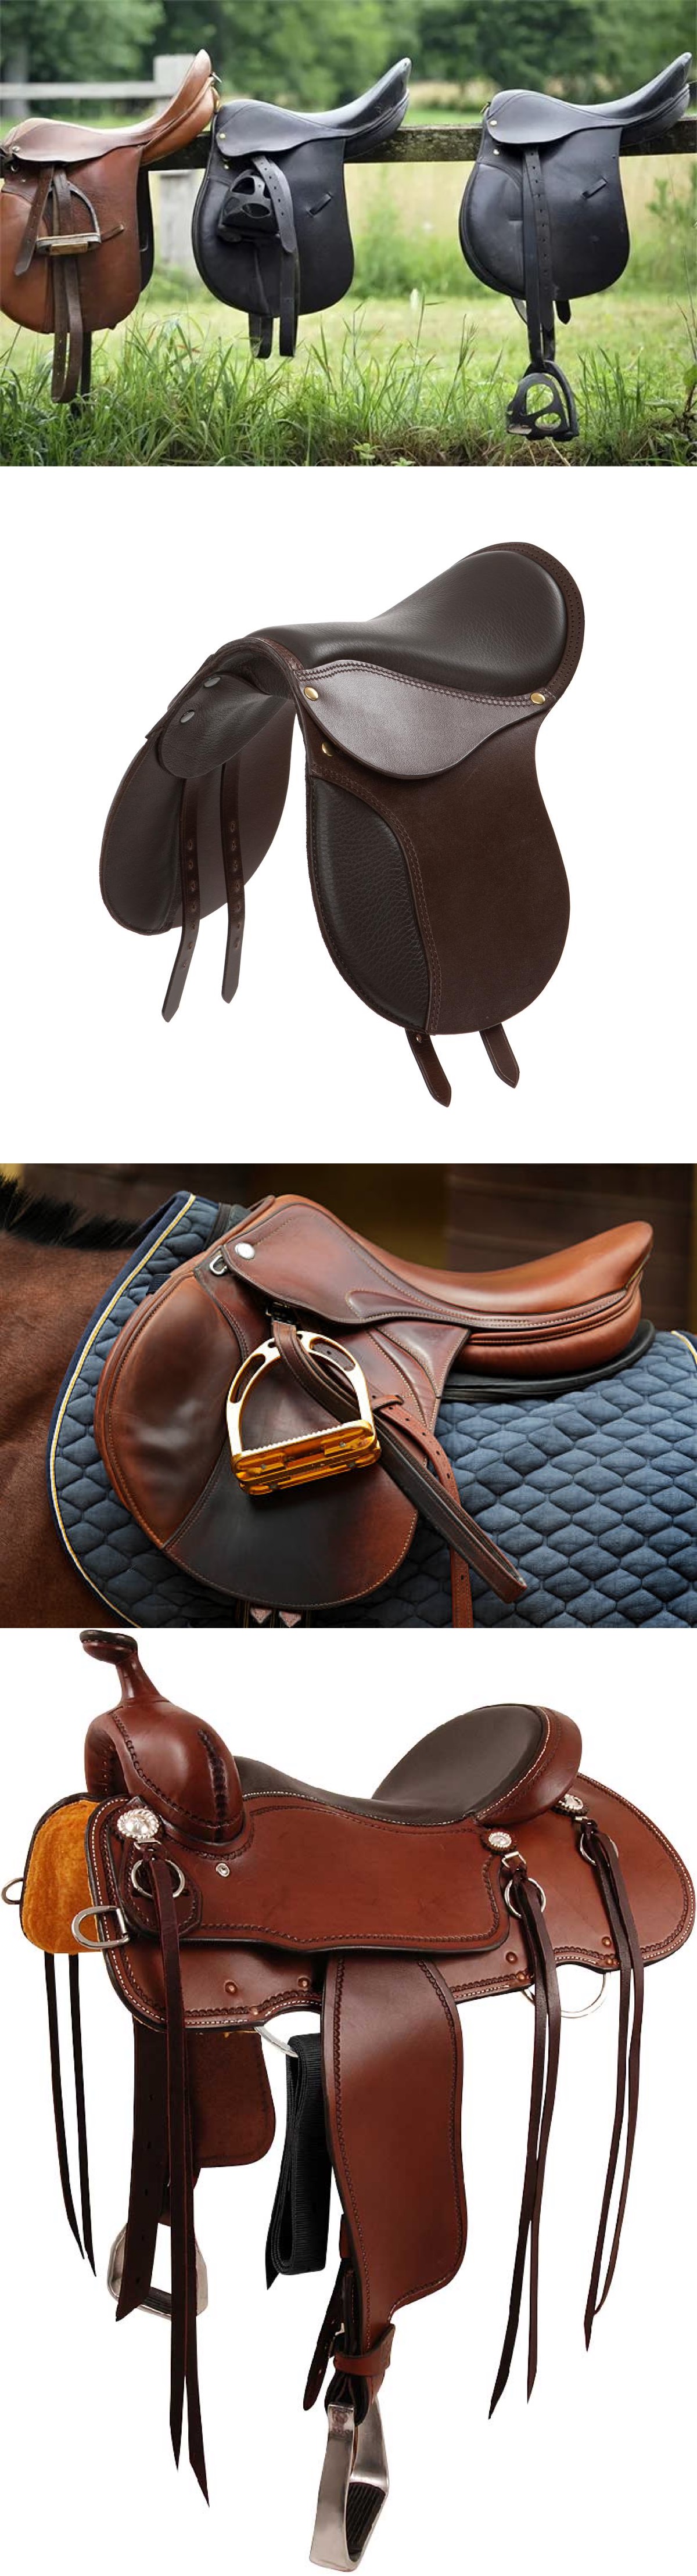 Chocolate Color Faux Suede Microfiber Leather for Horse Saddles